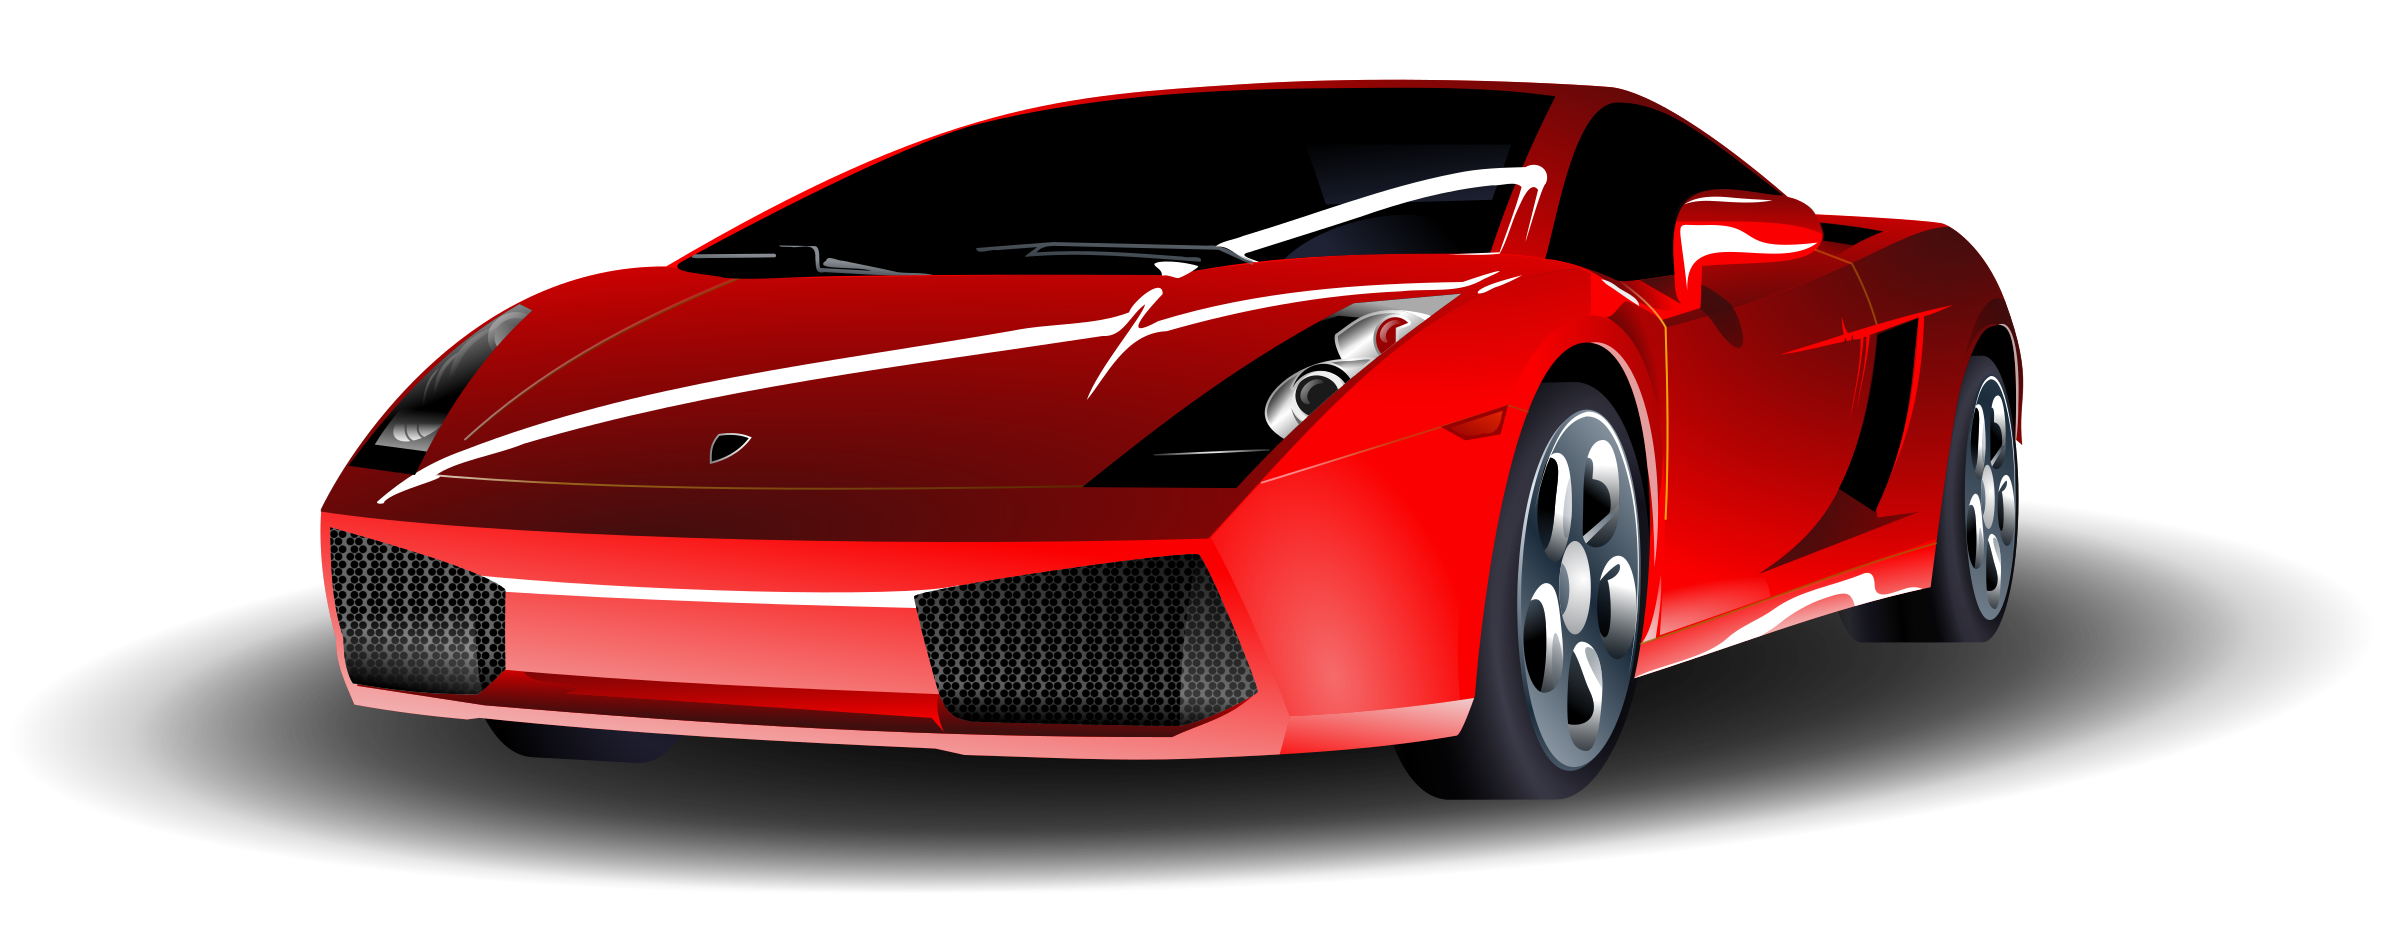 Car Red PNG - 140832